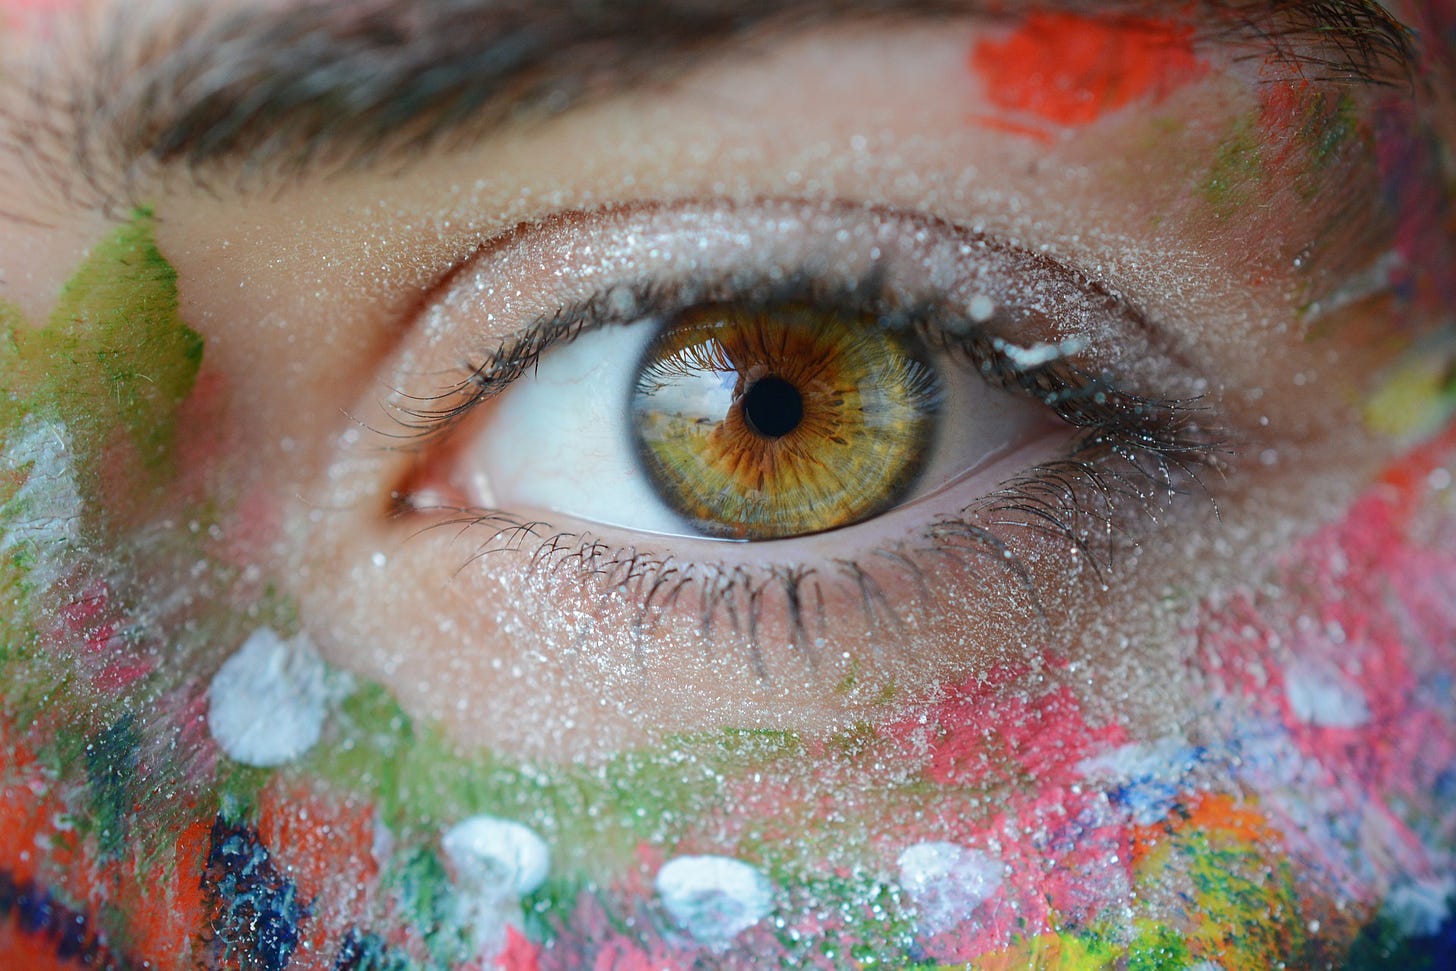 Human eye surrounded by colorful markings